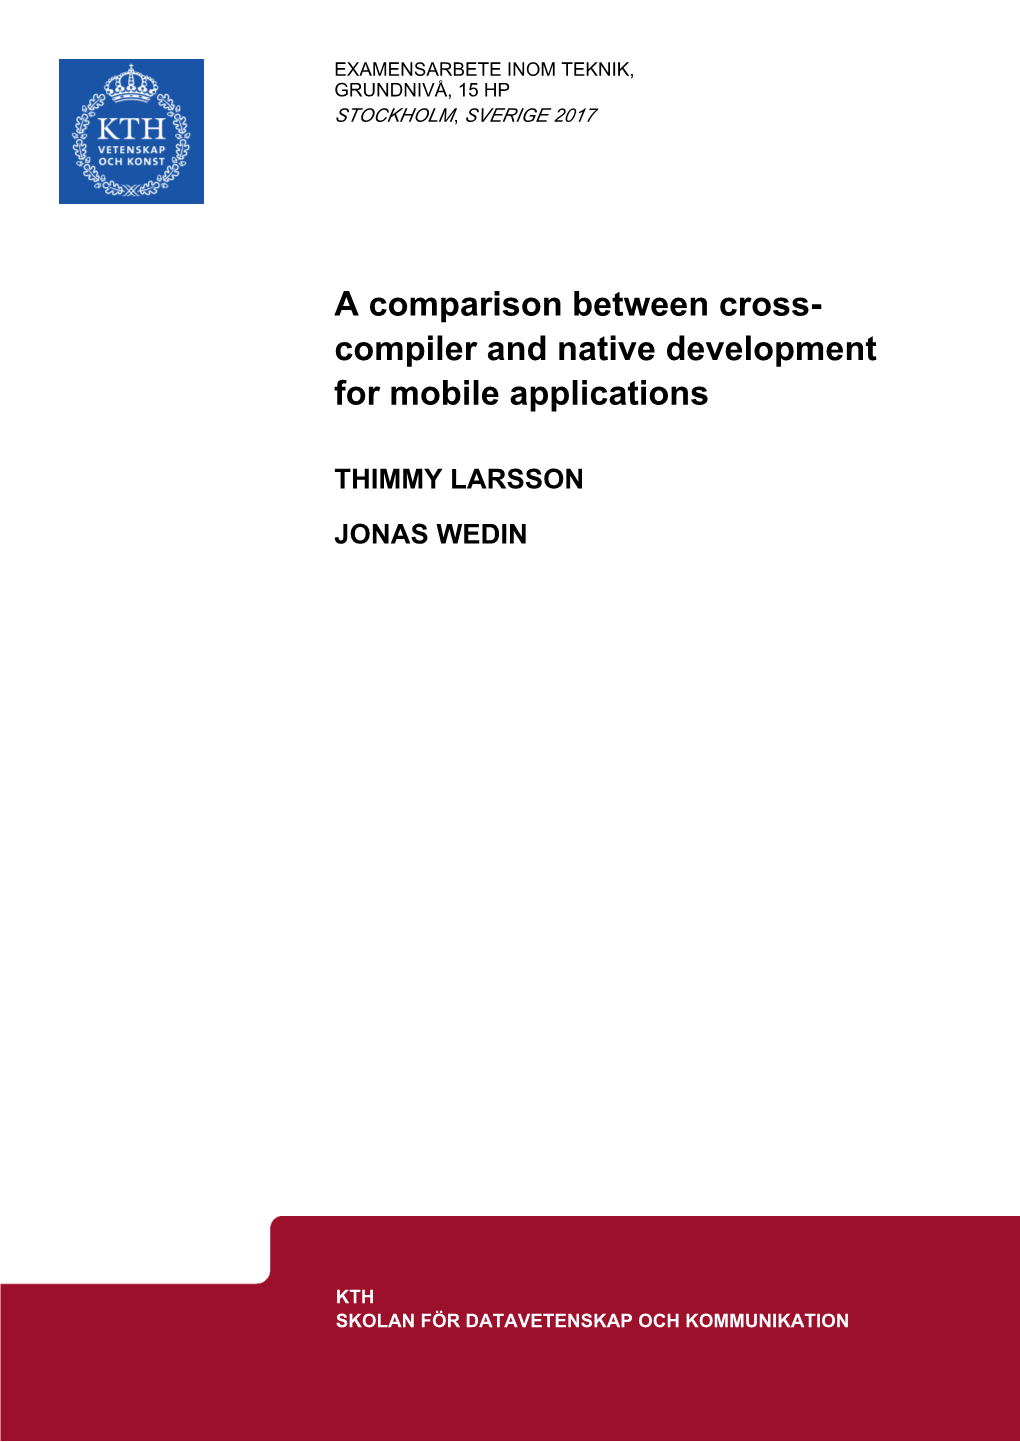 A Comparison Between Cross- Compiler and Native Development for Mobile Applications